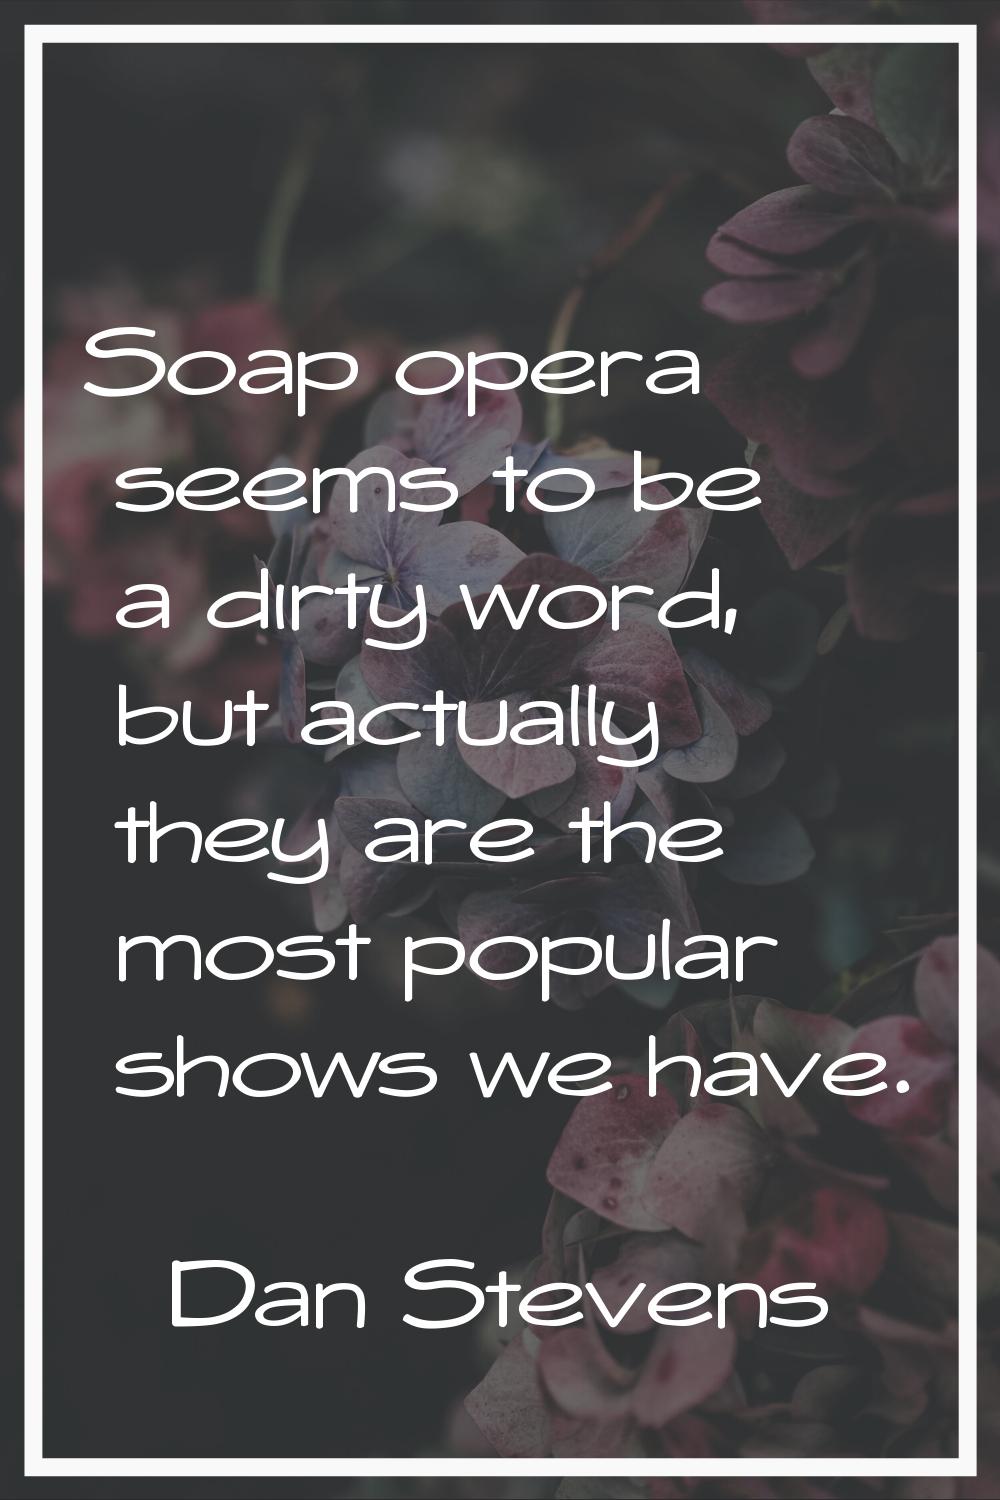 Soap opera seems to be a dirty word, but actually they are the most popular shows we have.